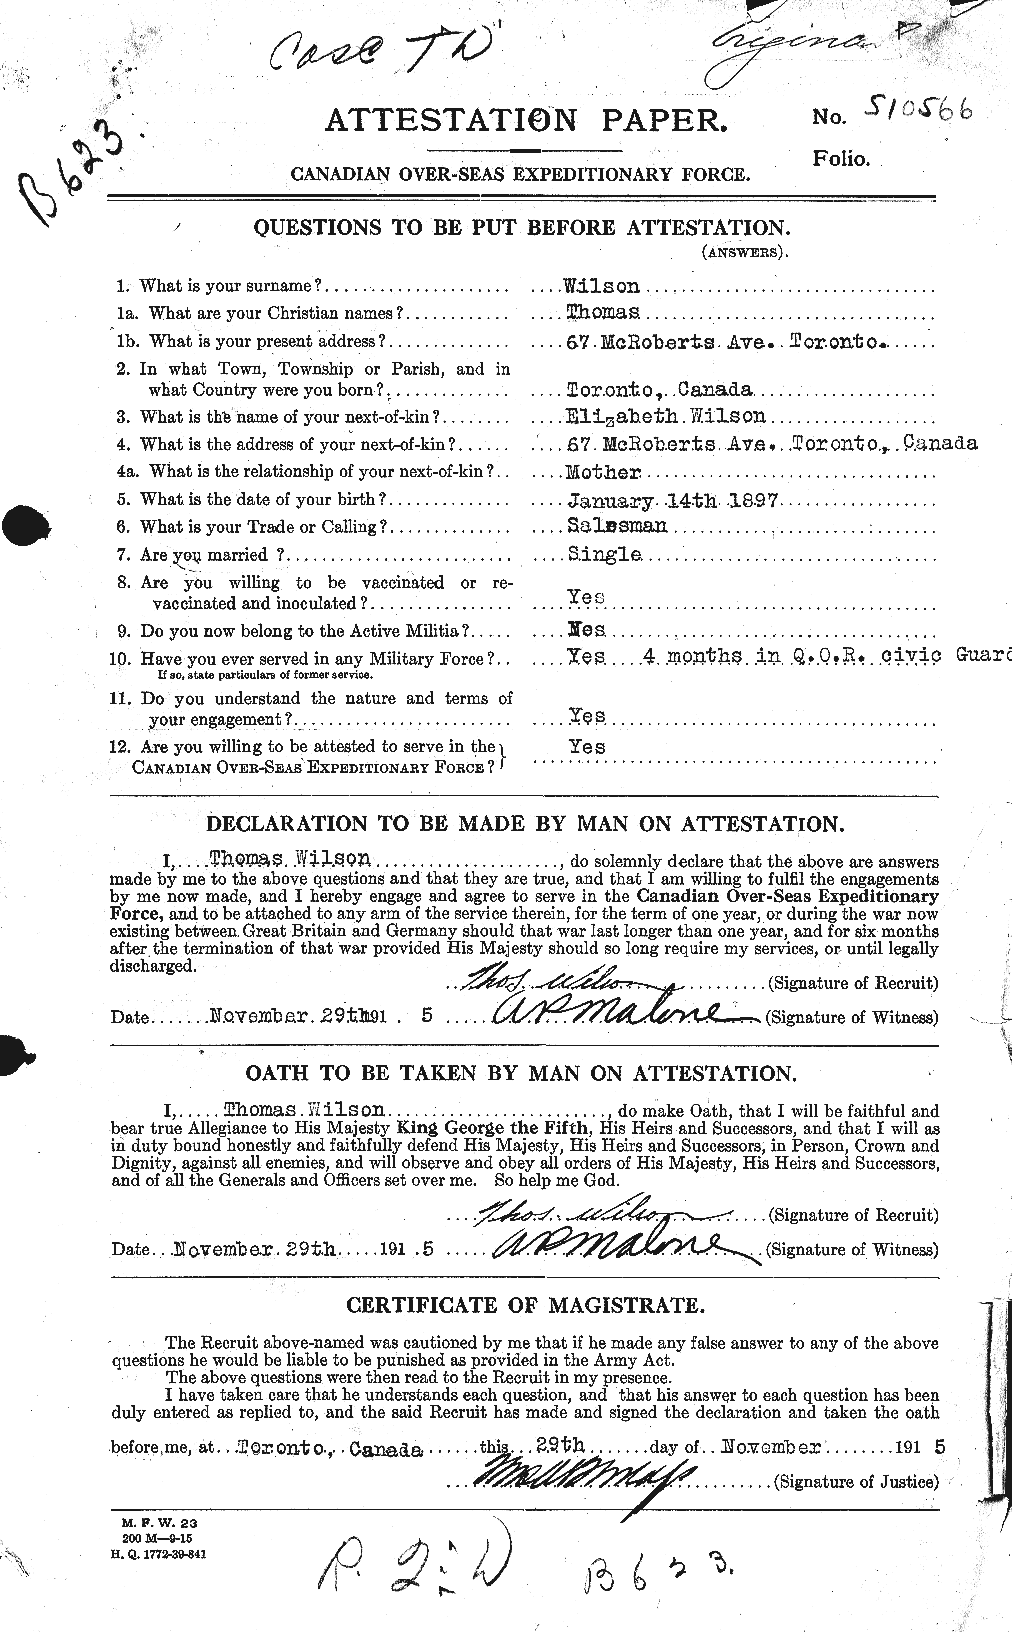 Personnel Records of the First World War - CEF 681199a